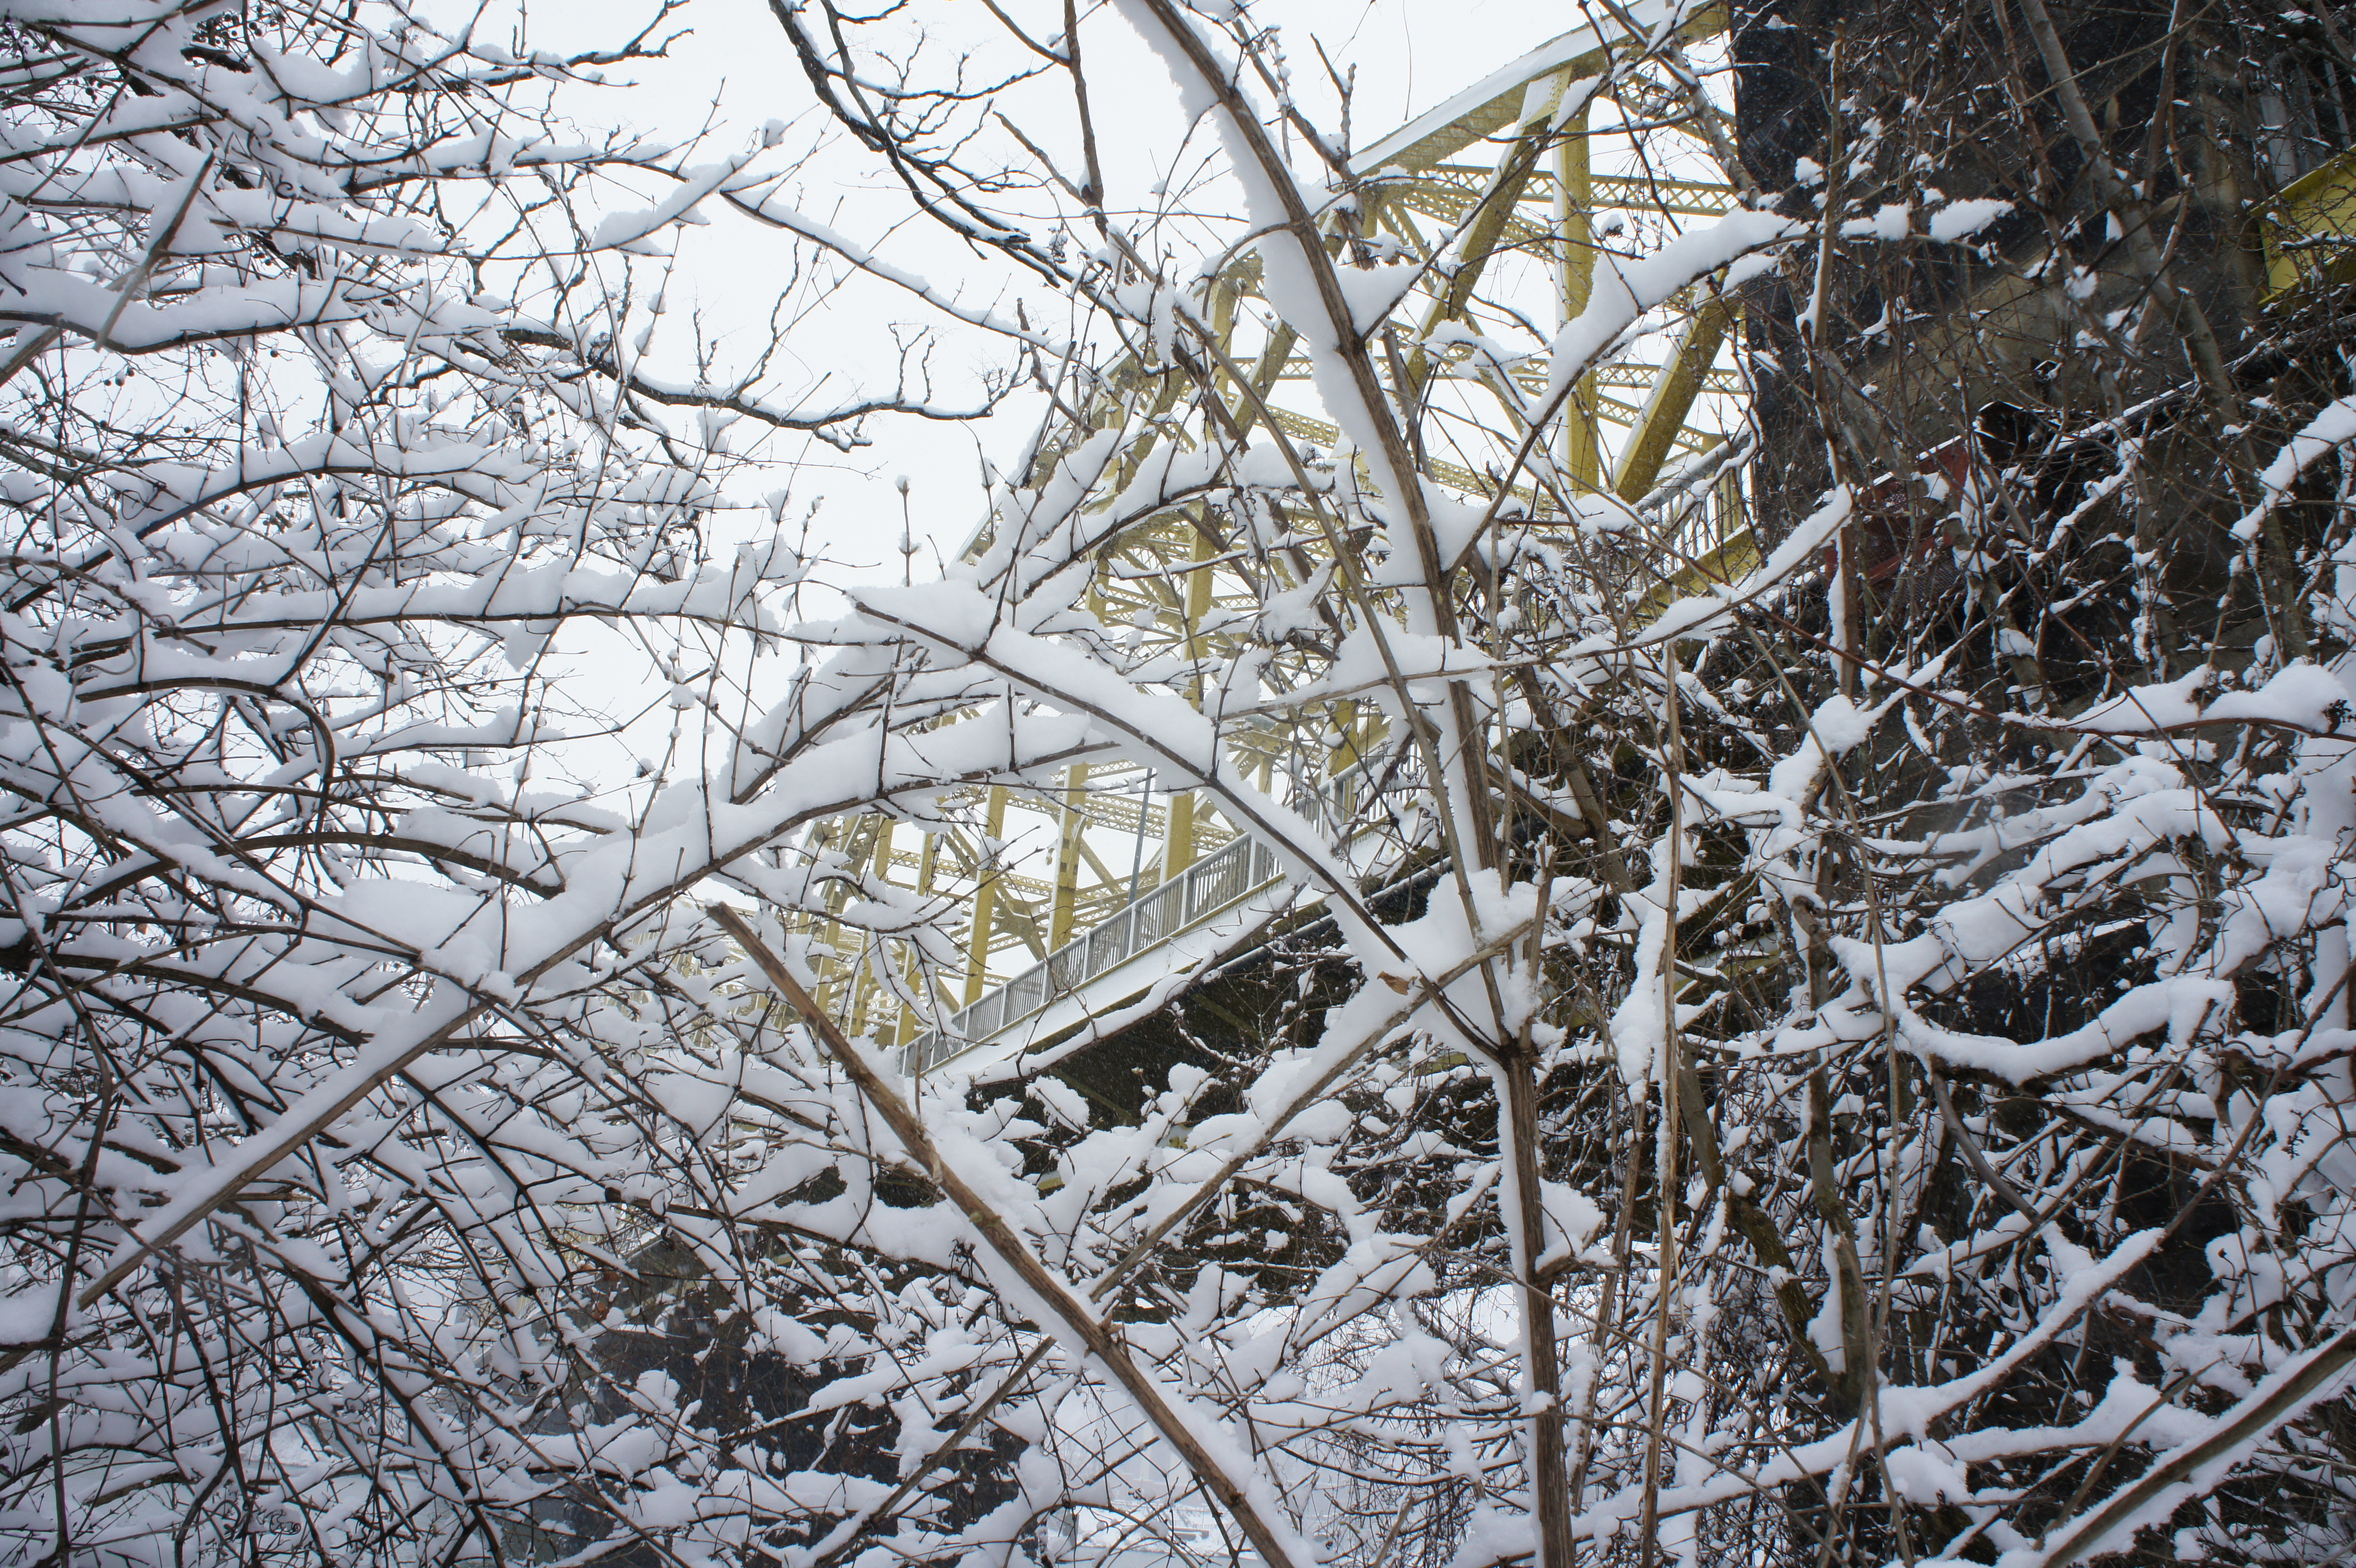 A photograph of snowy trees and a bridge, taken by Jennifer N. Shannon